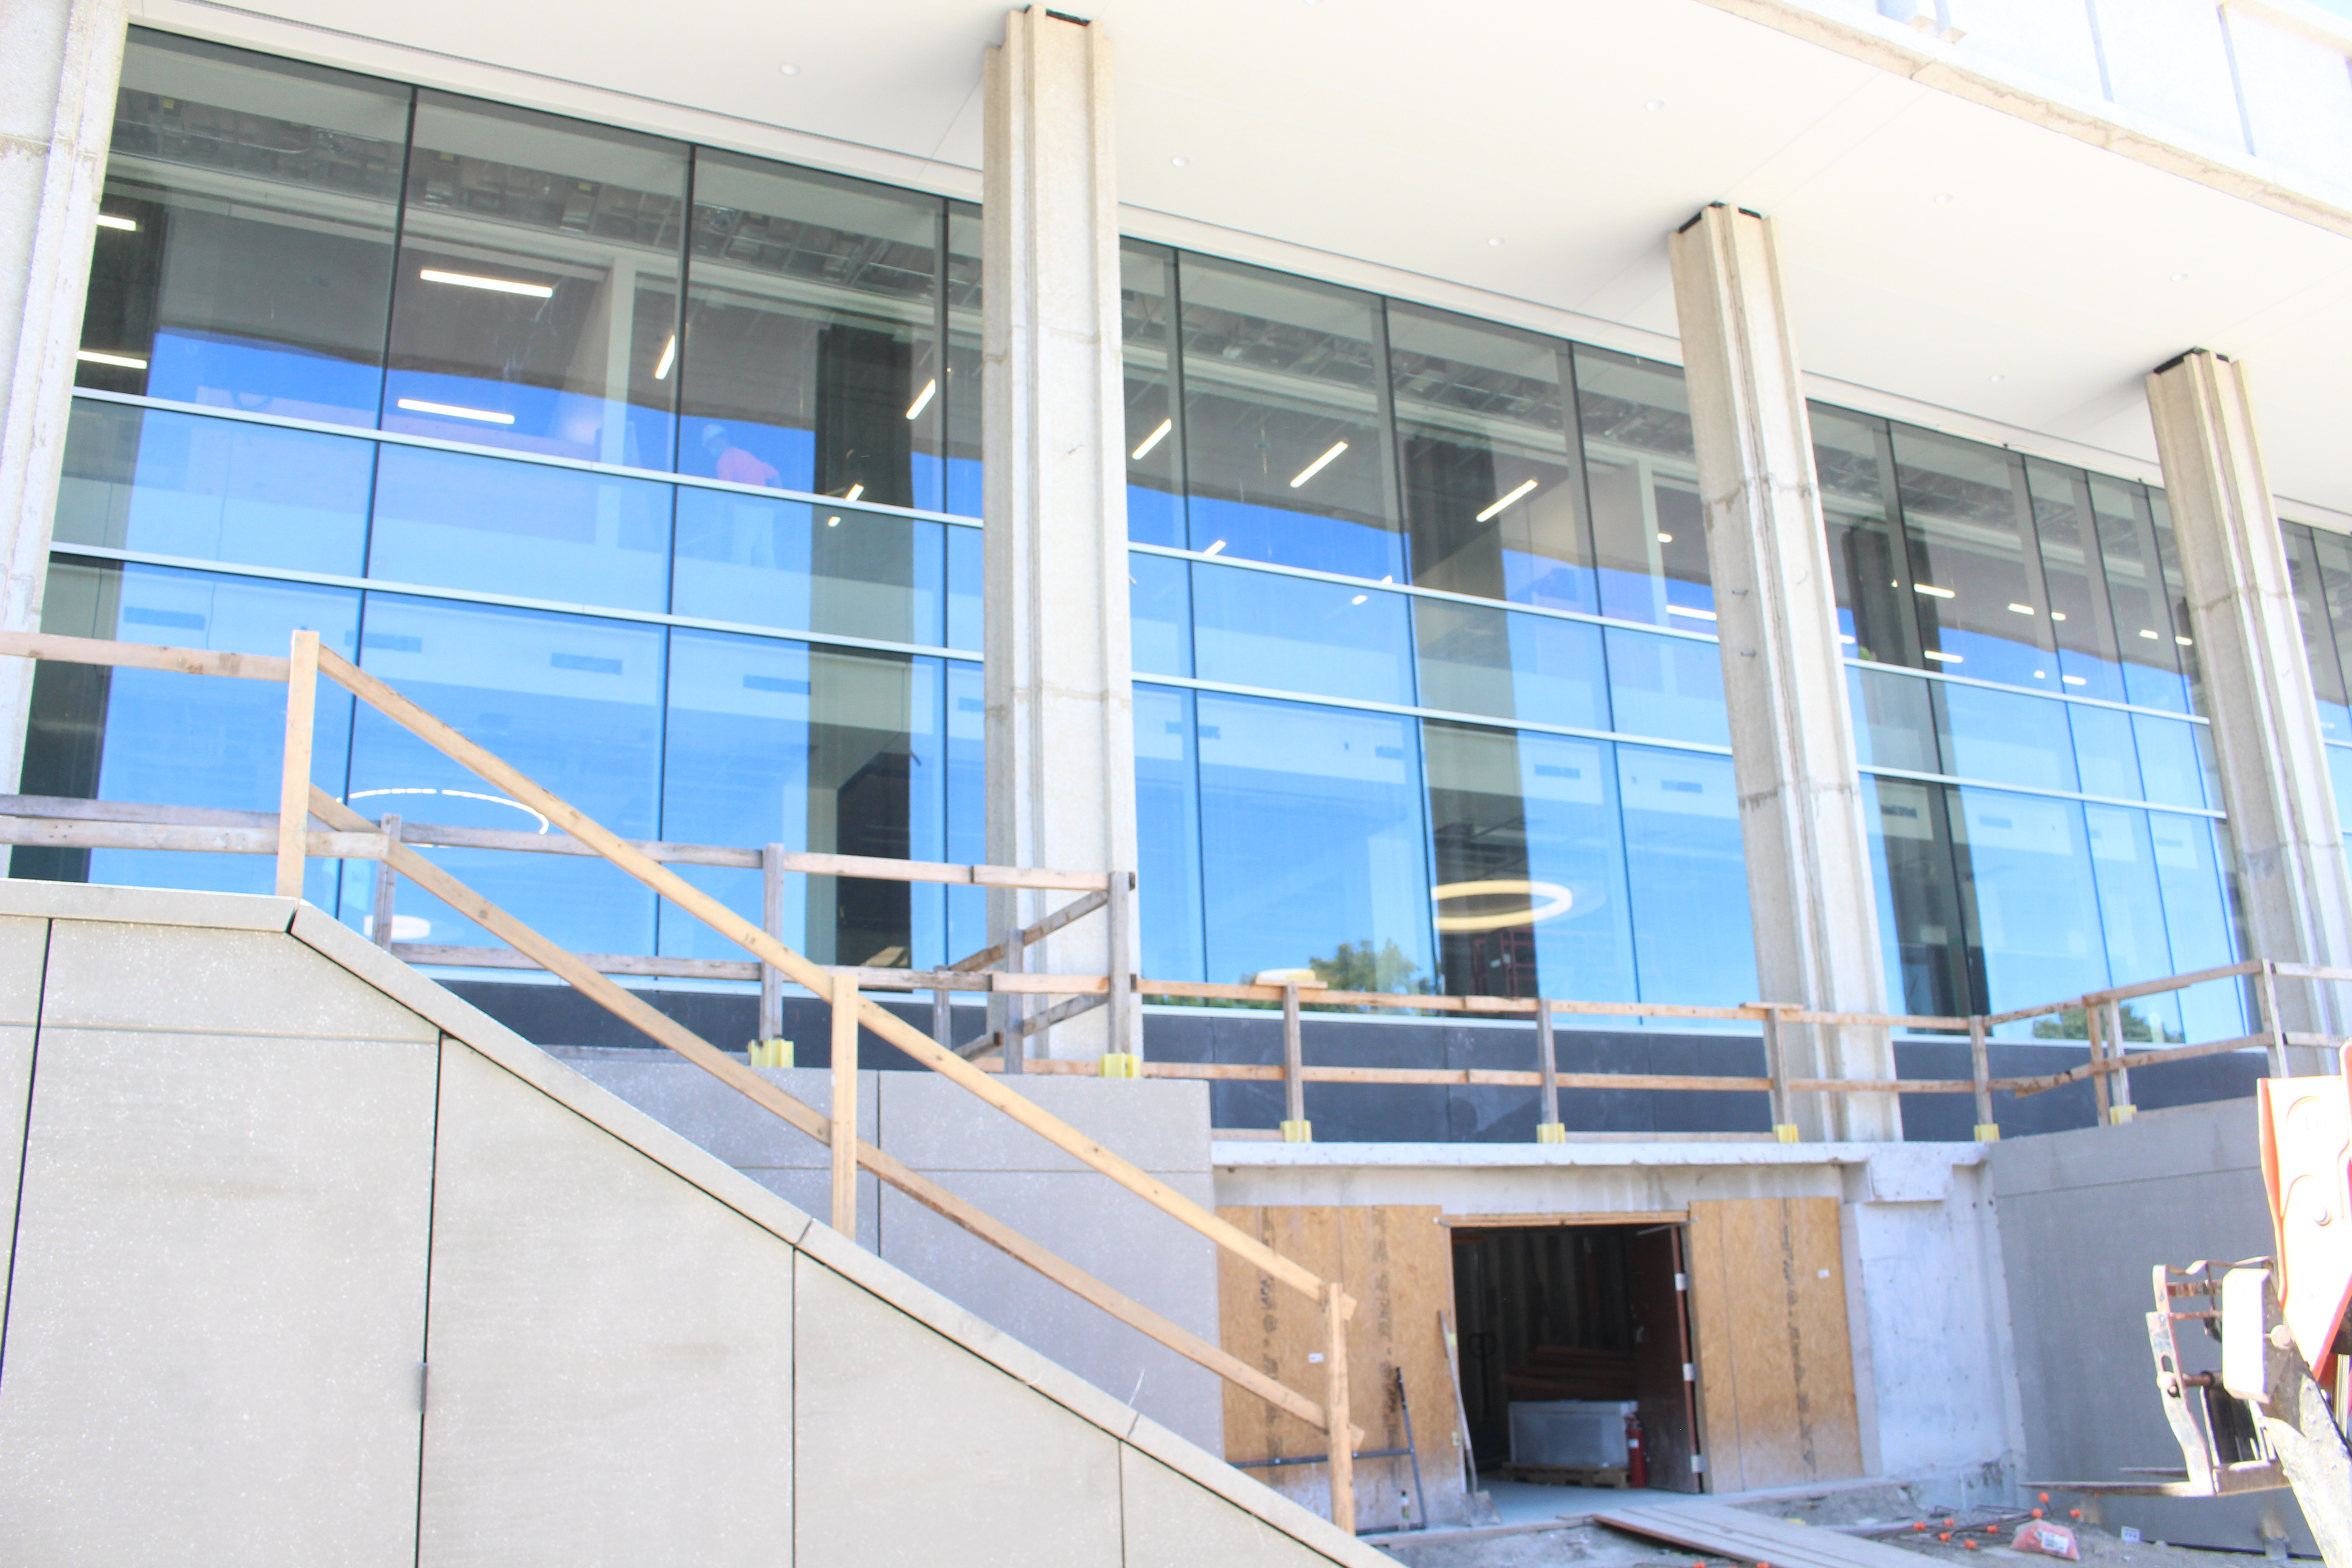 East side of Dinsdale Family Learning Commons, under renovation